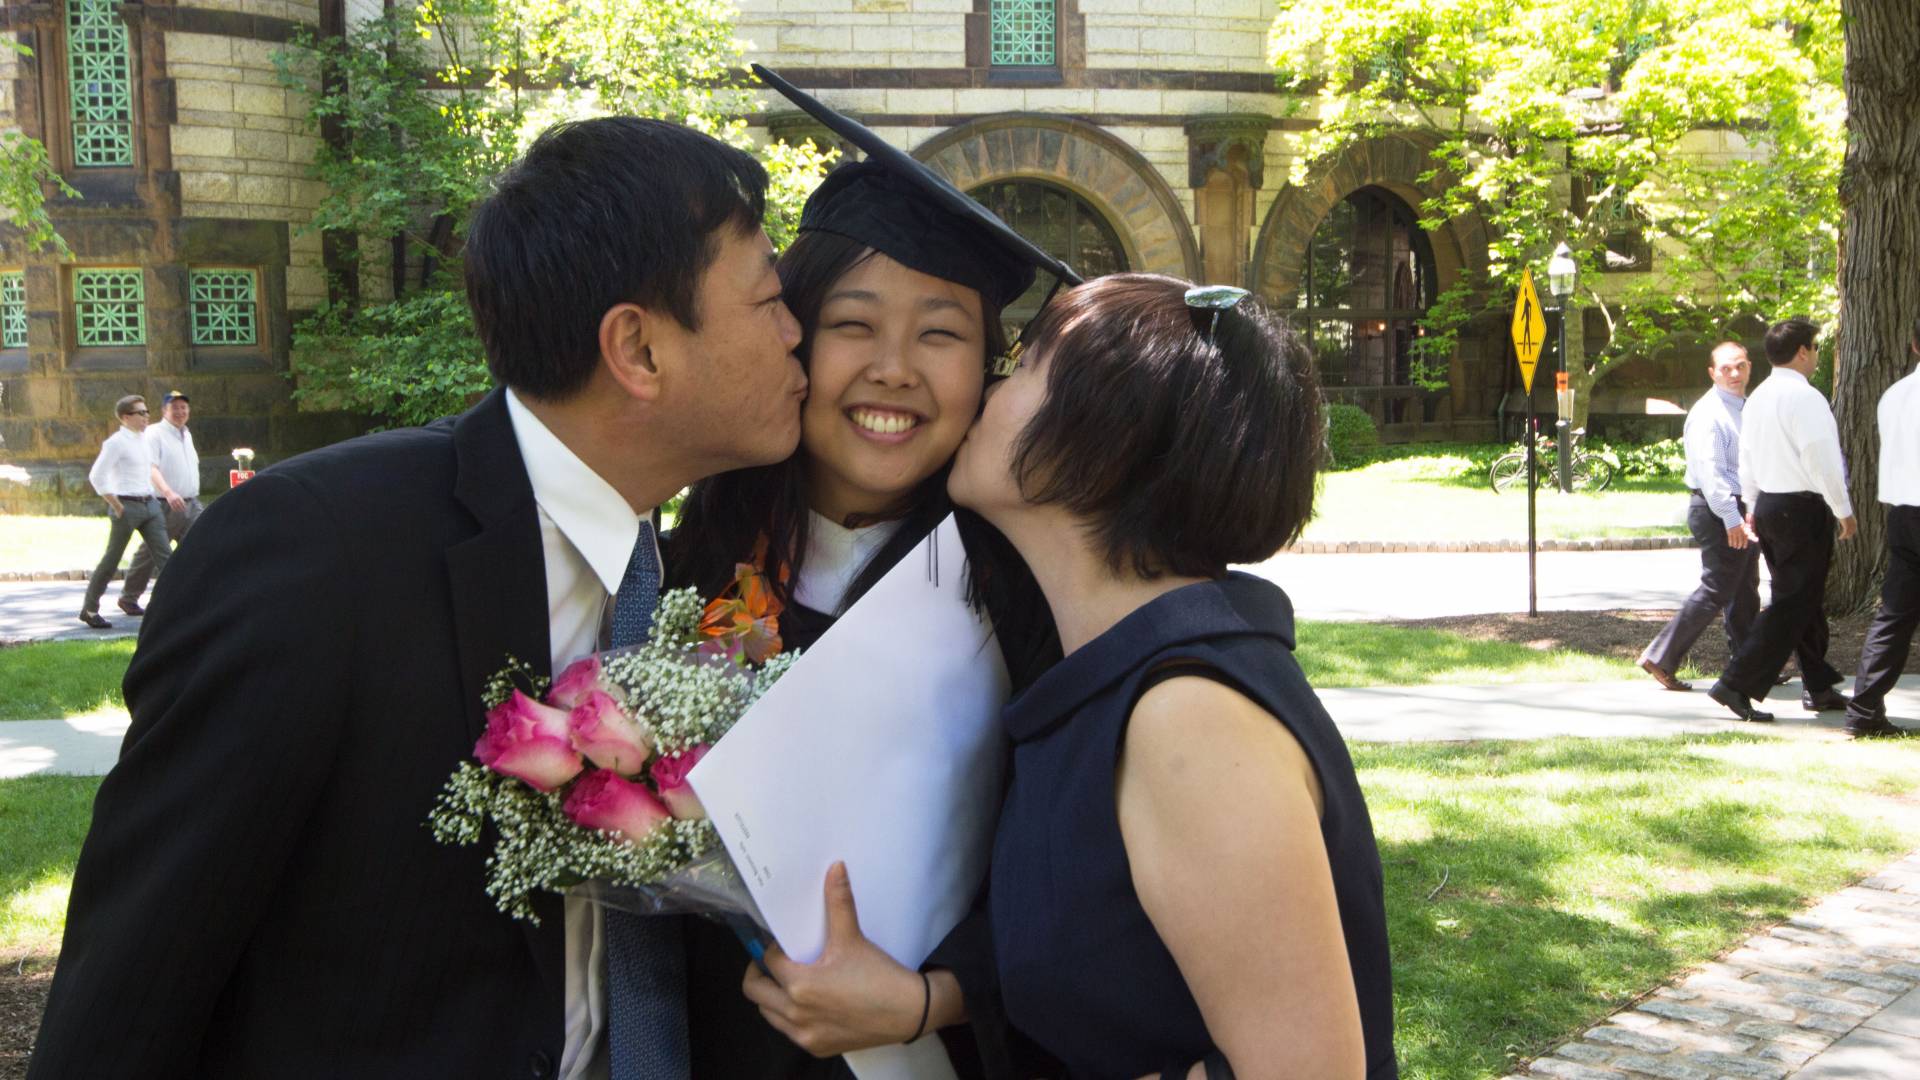 Photo of Parents congratulating their daughter at Commencement with a kiss